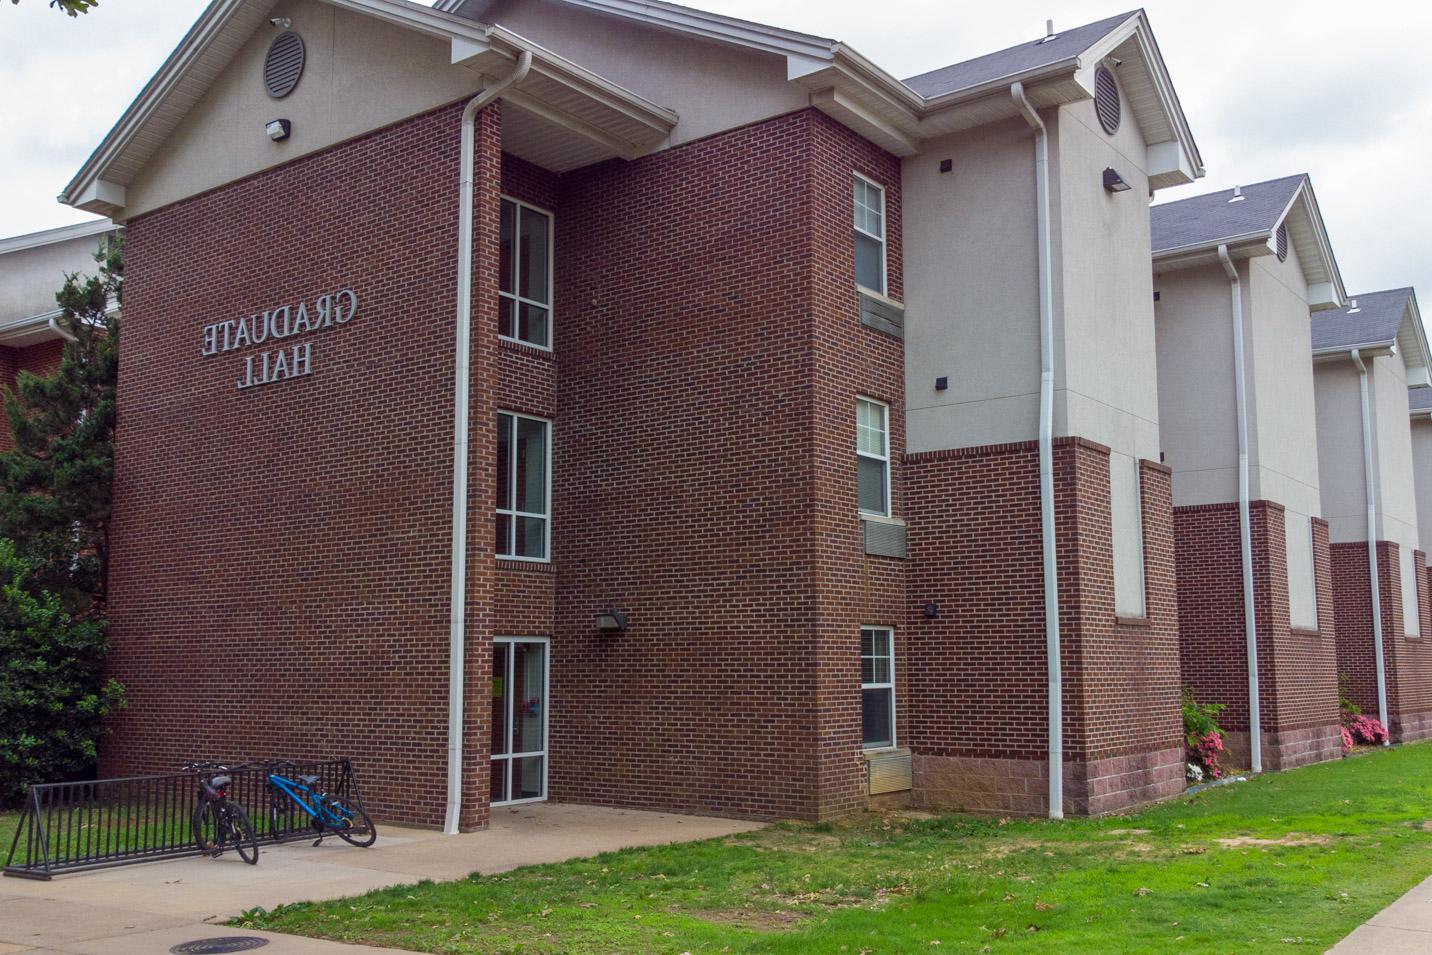 This is a photo of Graduate Hall, a residence hall at Harding University.